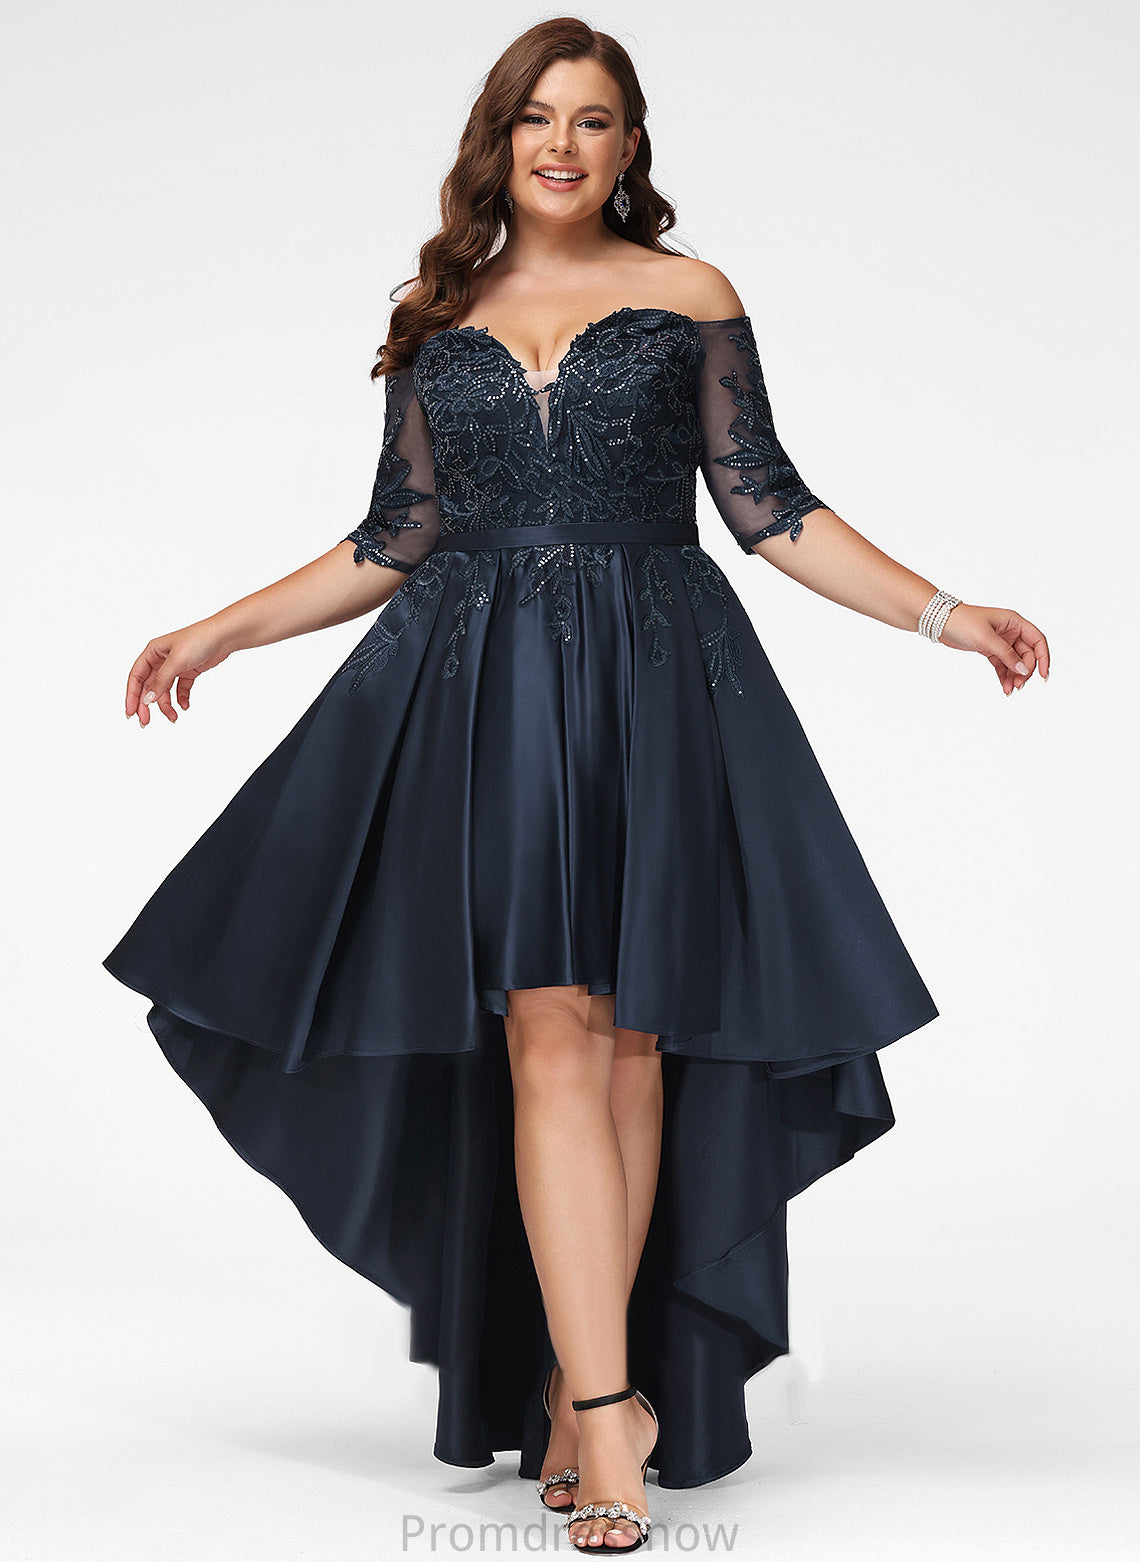 Asymmetrical Off-the-Shoulder Prom Dresses A-Line Lace Meadow Sequins With Satin